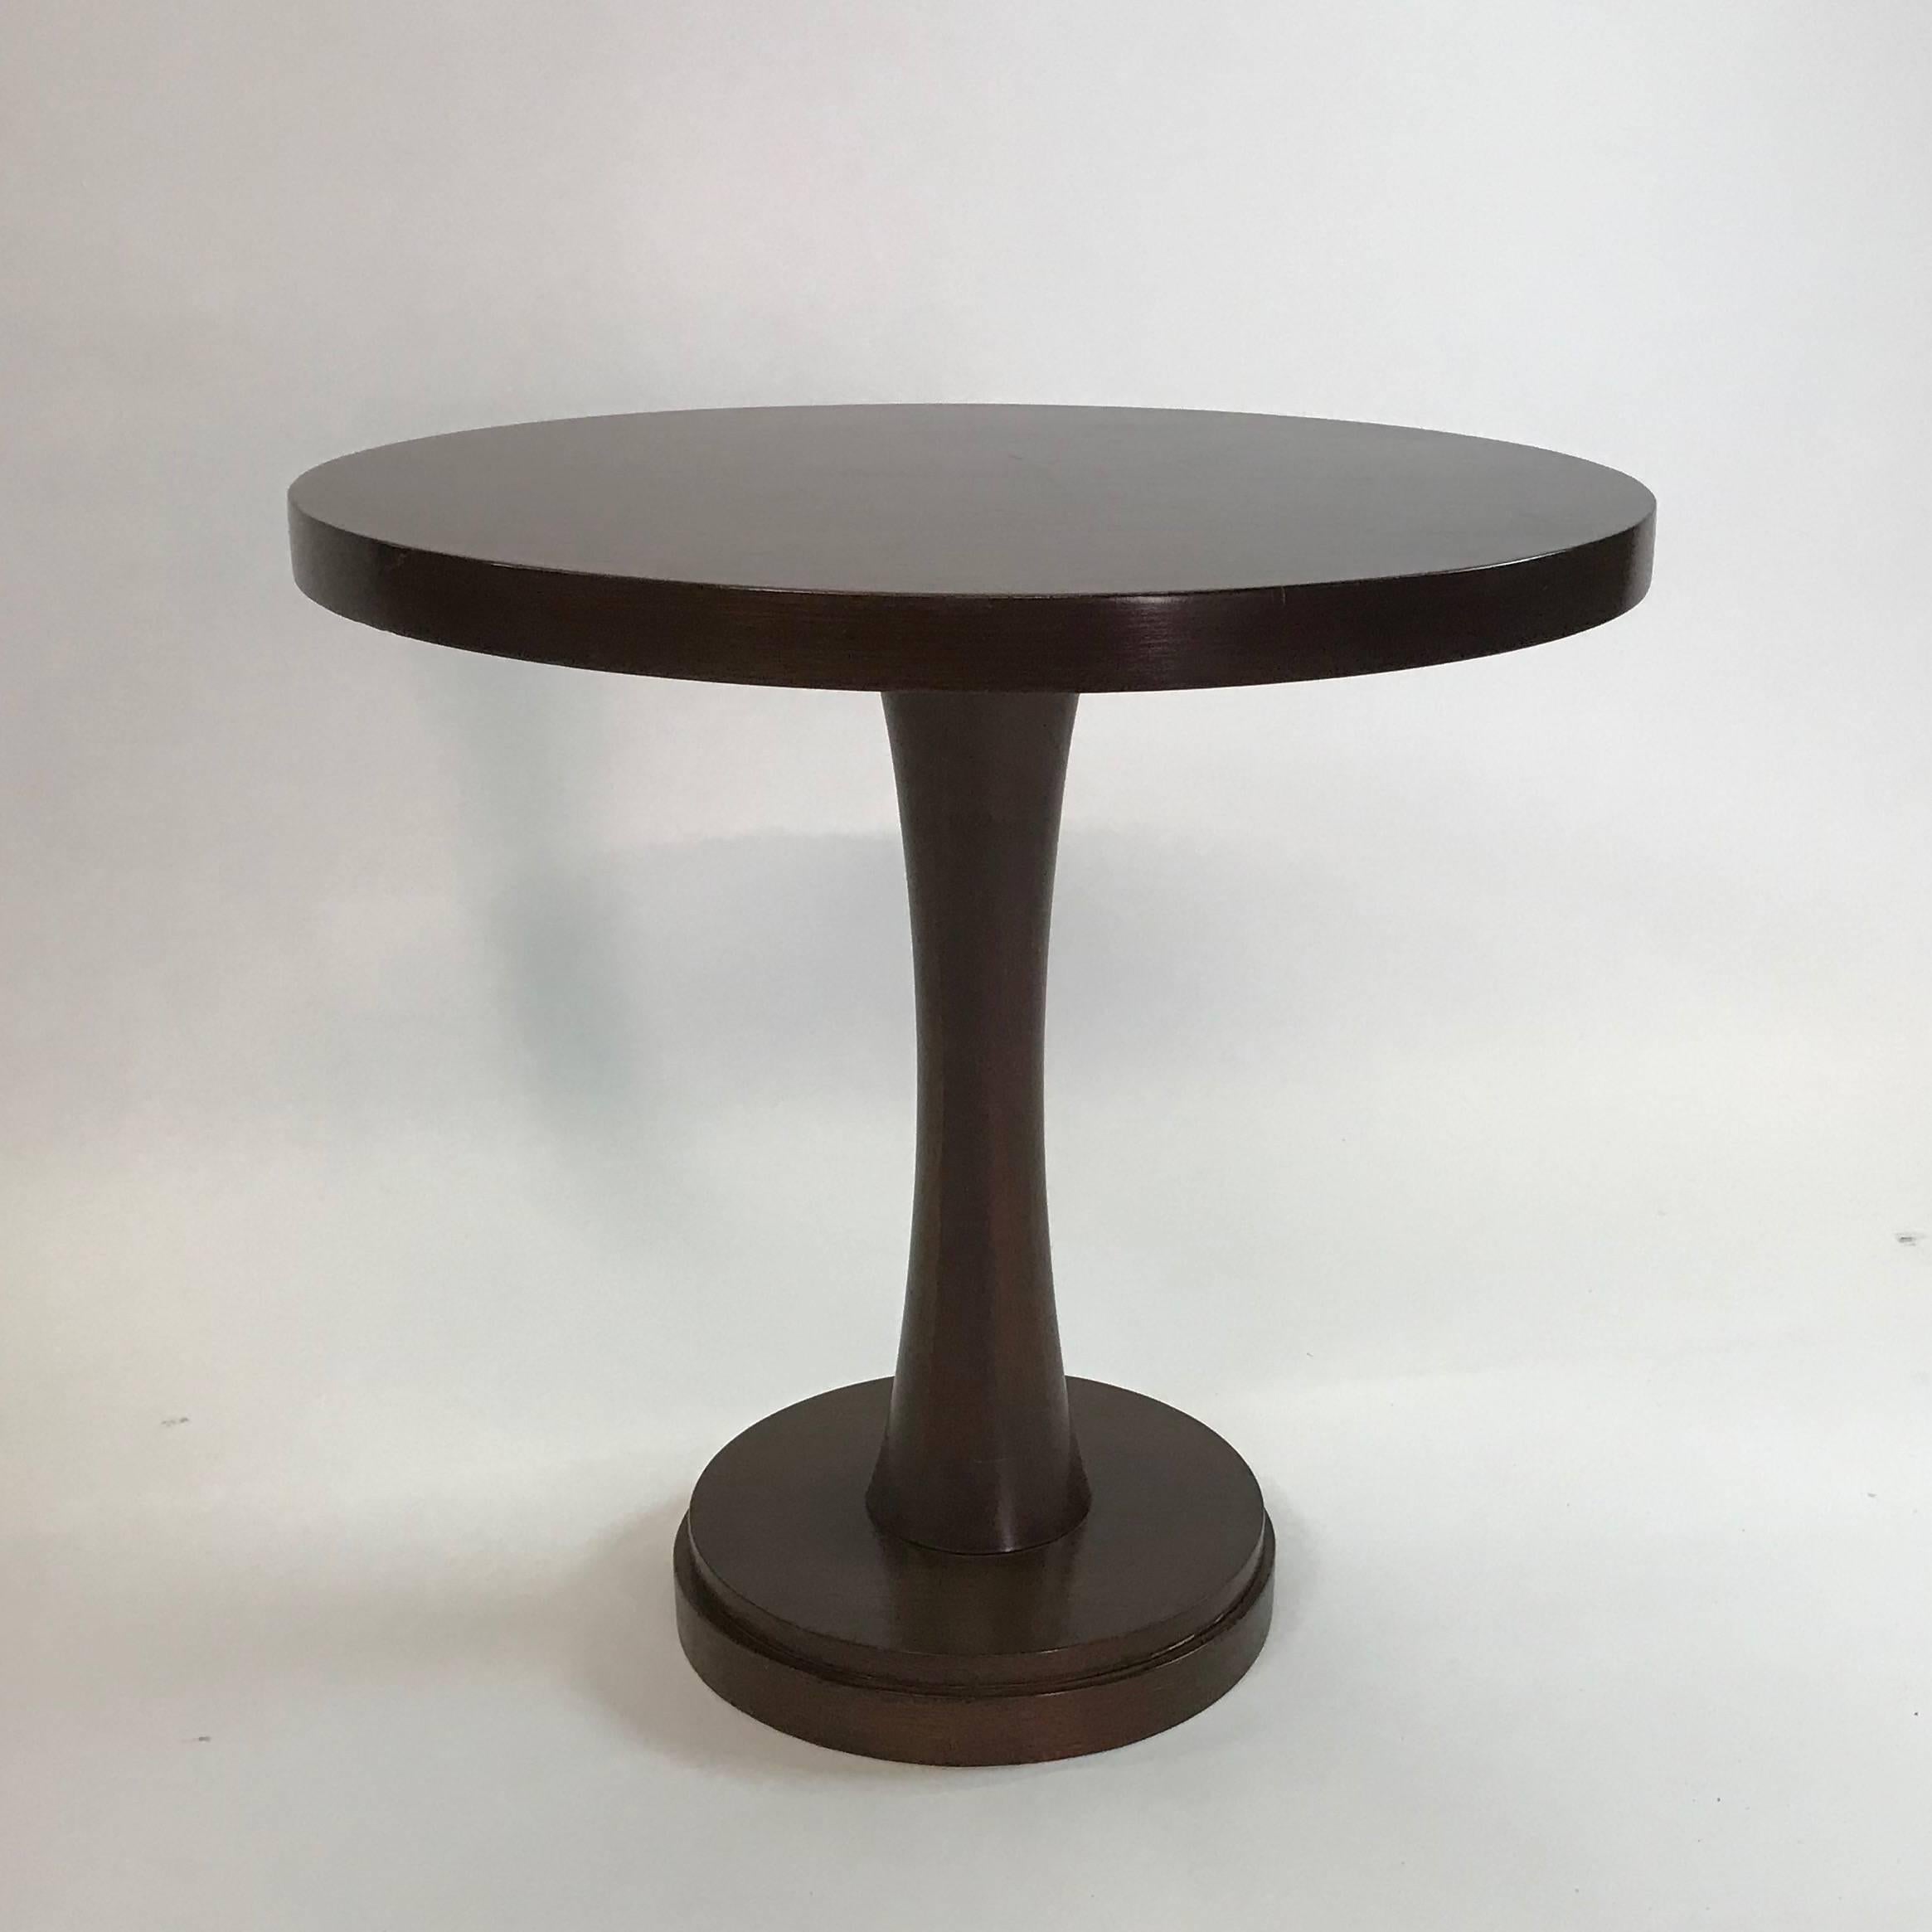 Simple but elegant, nicely proportioned, midcentury, mahogany, pedestal, centre table features a solid core with veneer top.